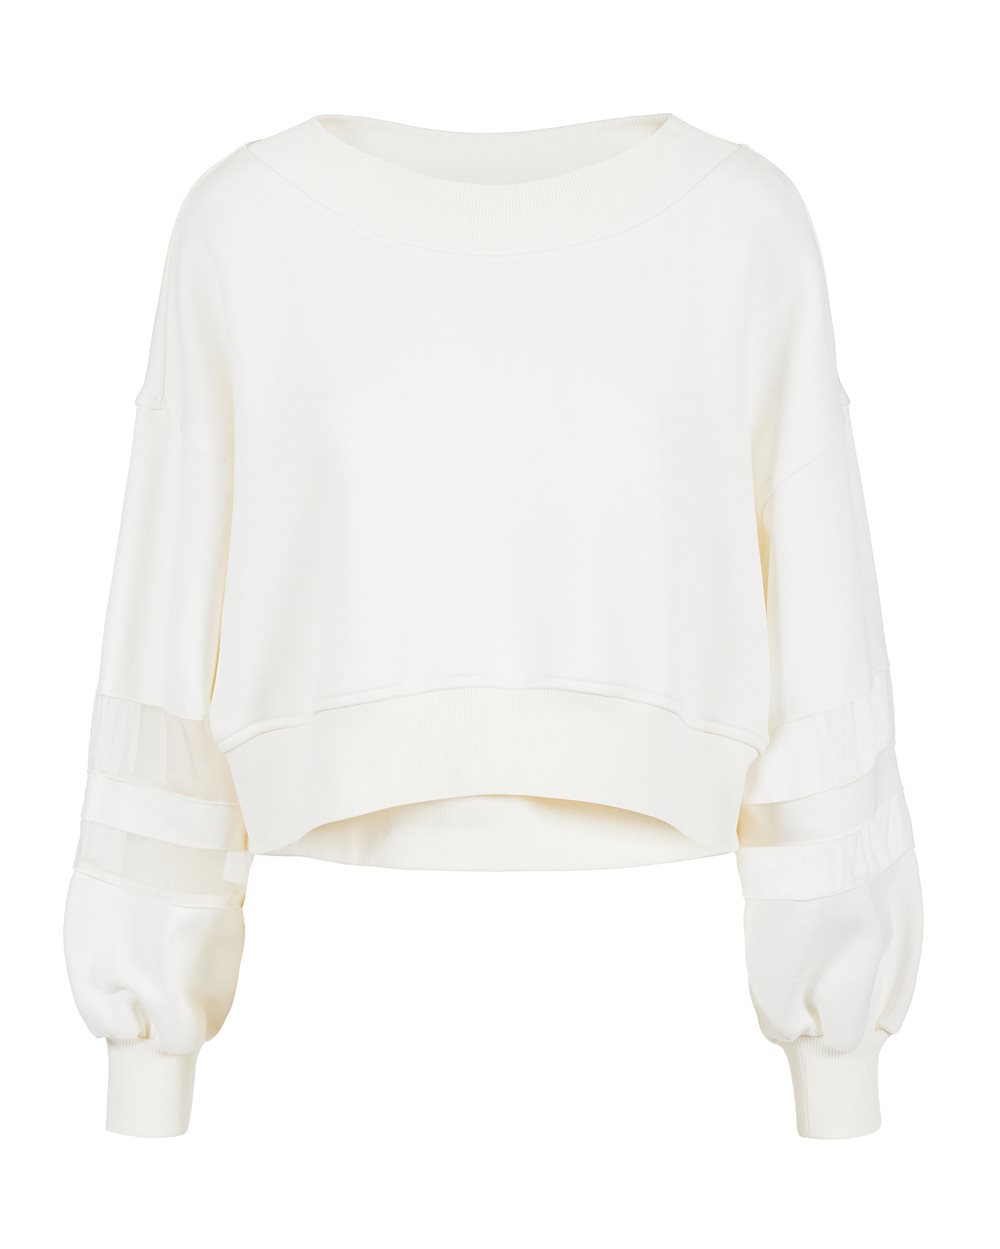 Sweatshirt with logo and organza details - carosello preview donna | Iceberg - Official Website